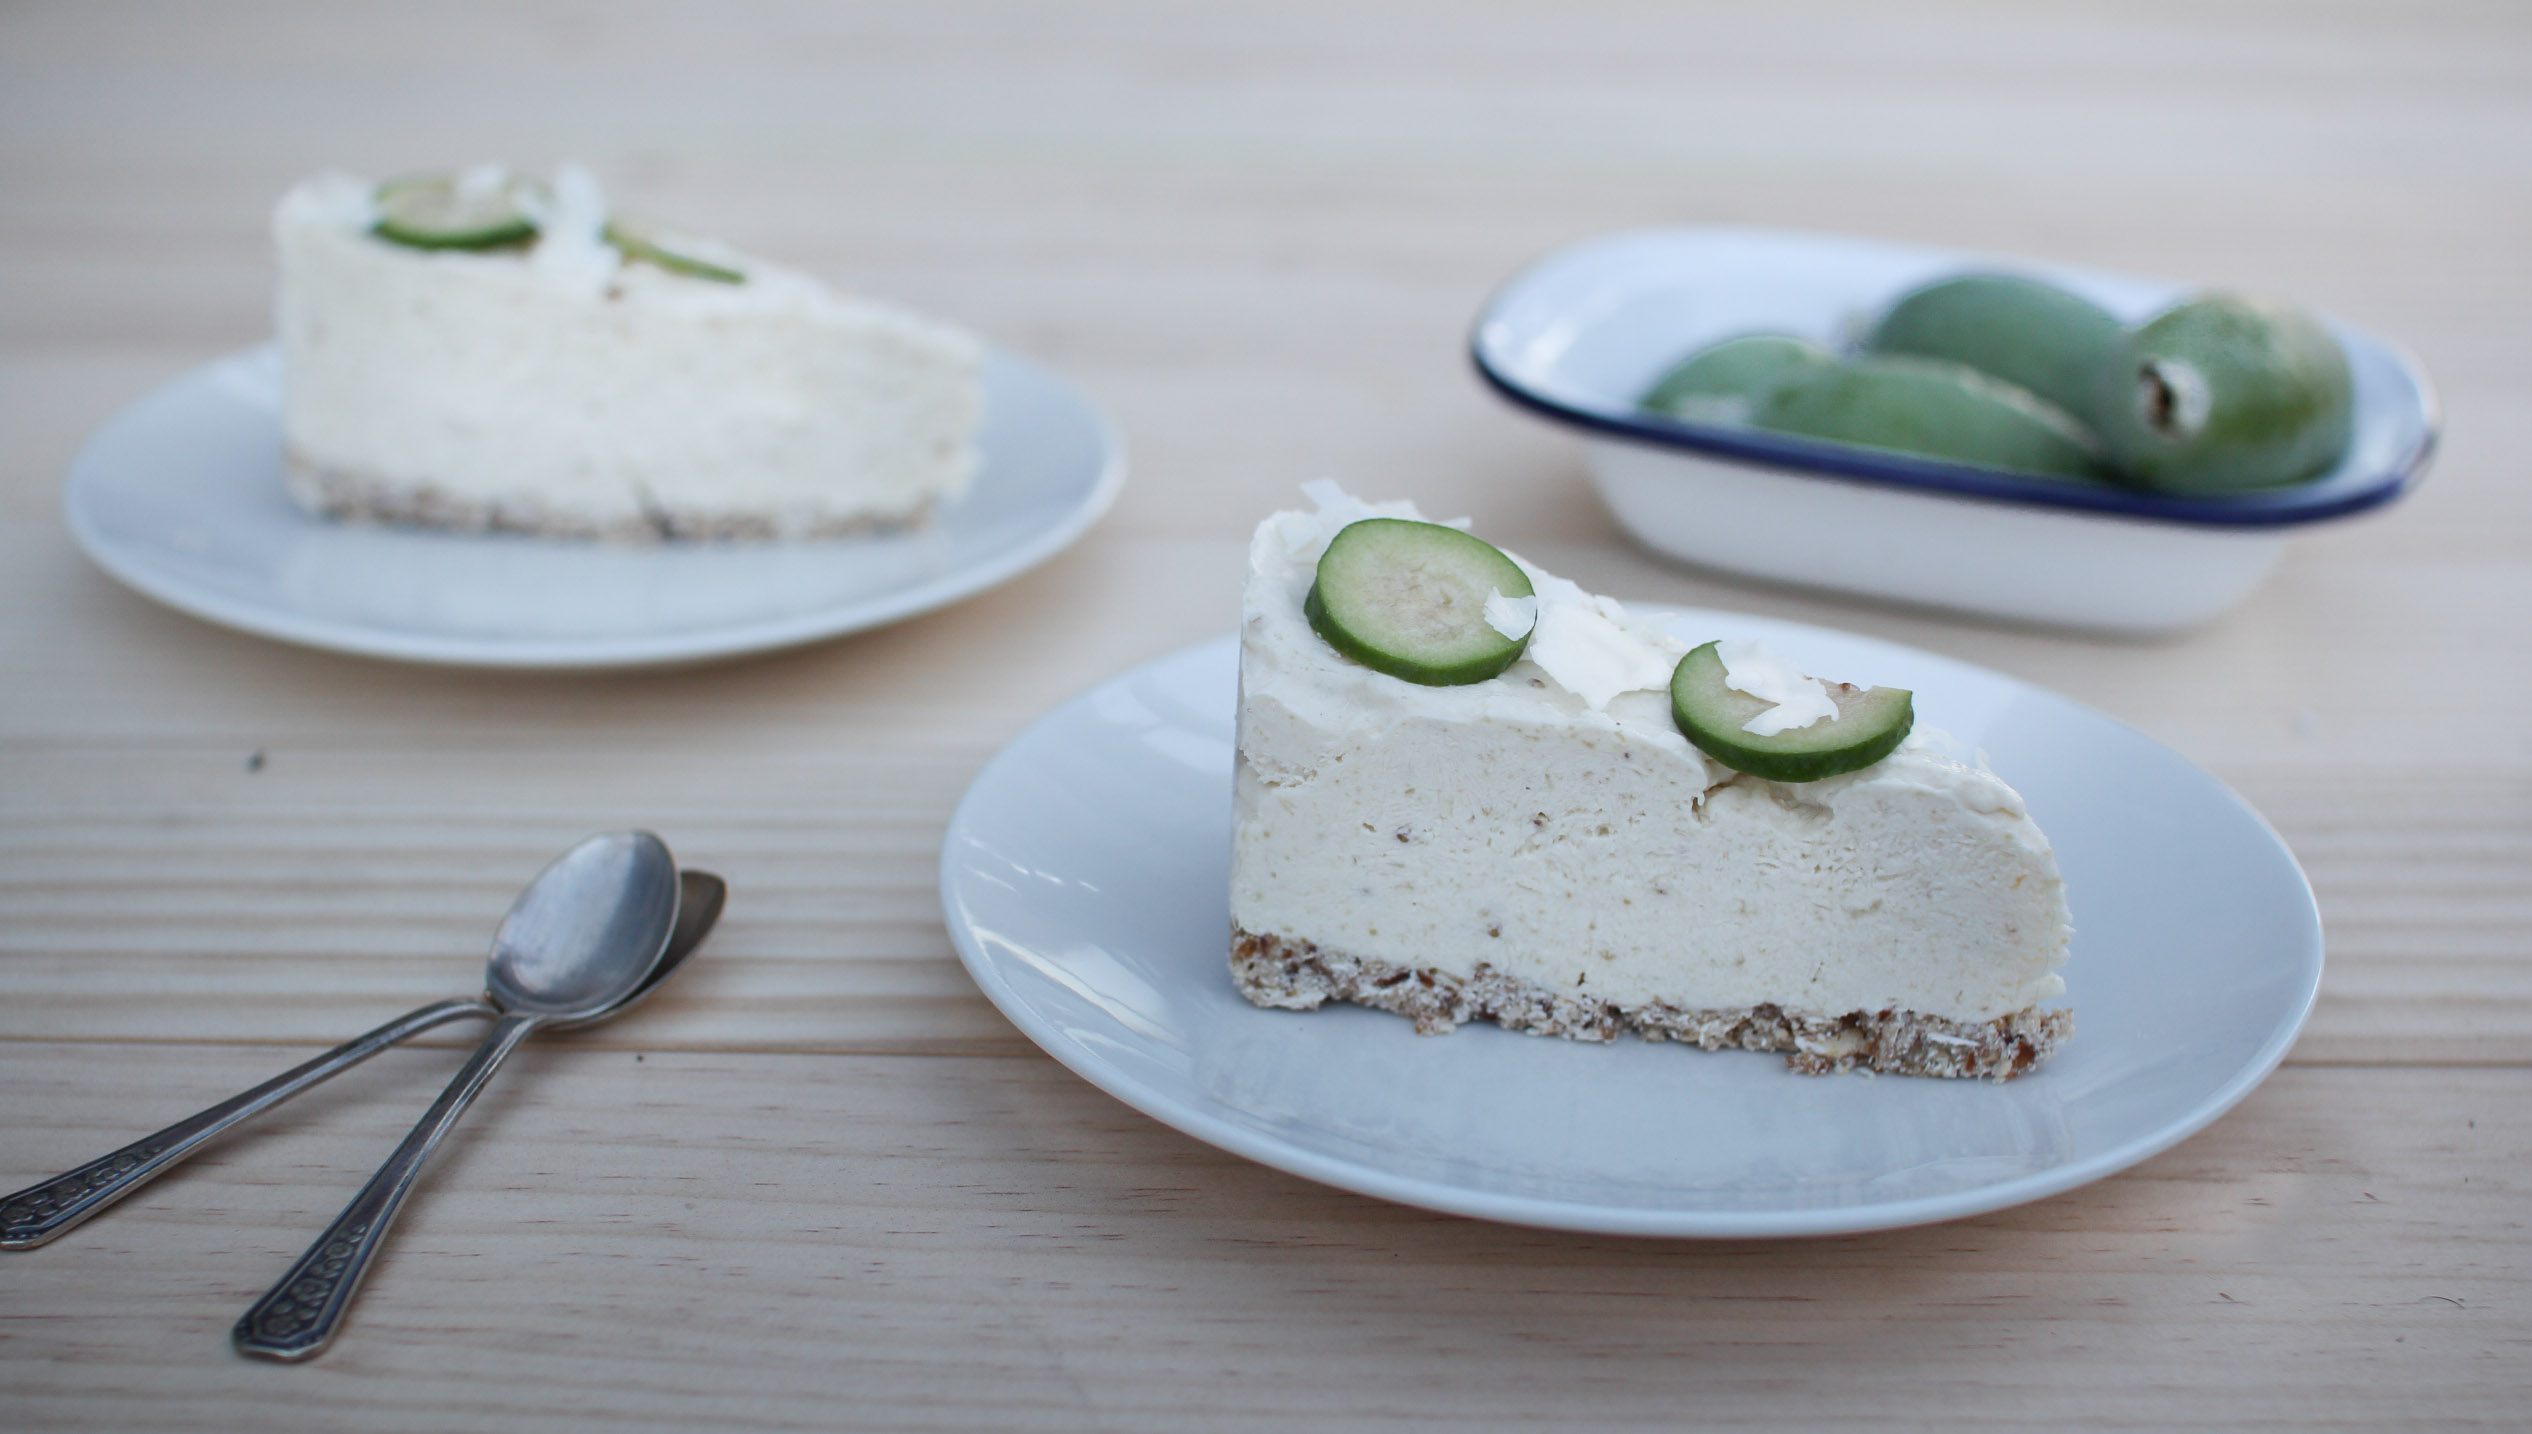 Feijoa Cheesecake (a healthier version) by Eat Well NZ | onetakekate.com